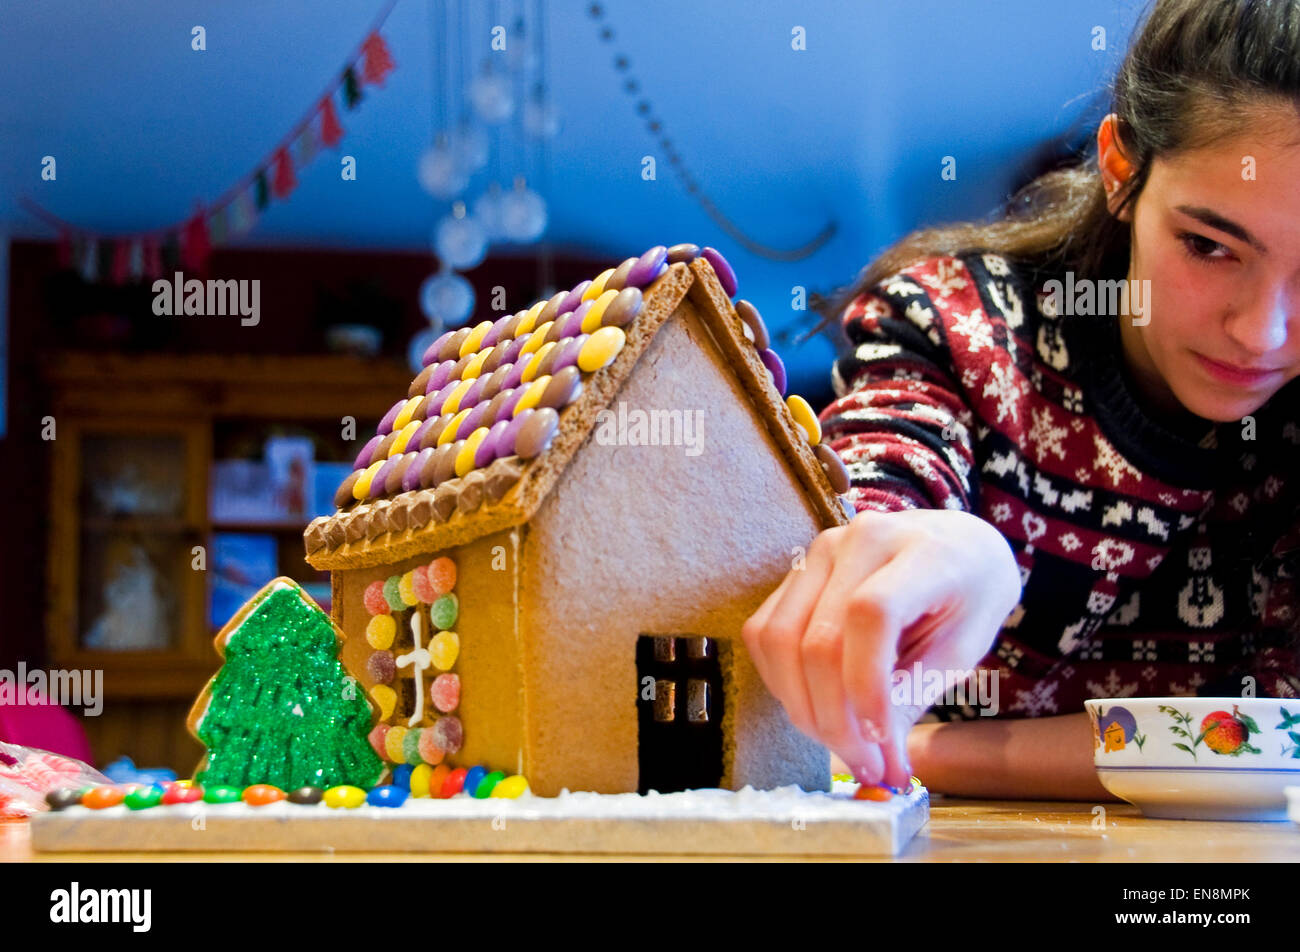 Horizontal view of a gingerbread house being decorated by a young girl for Christmas. Stock Photo